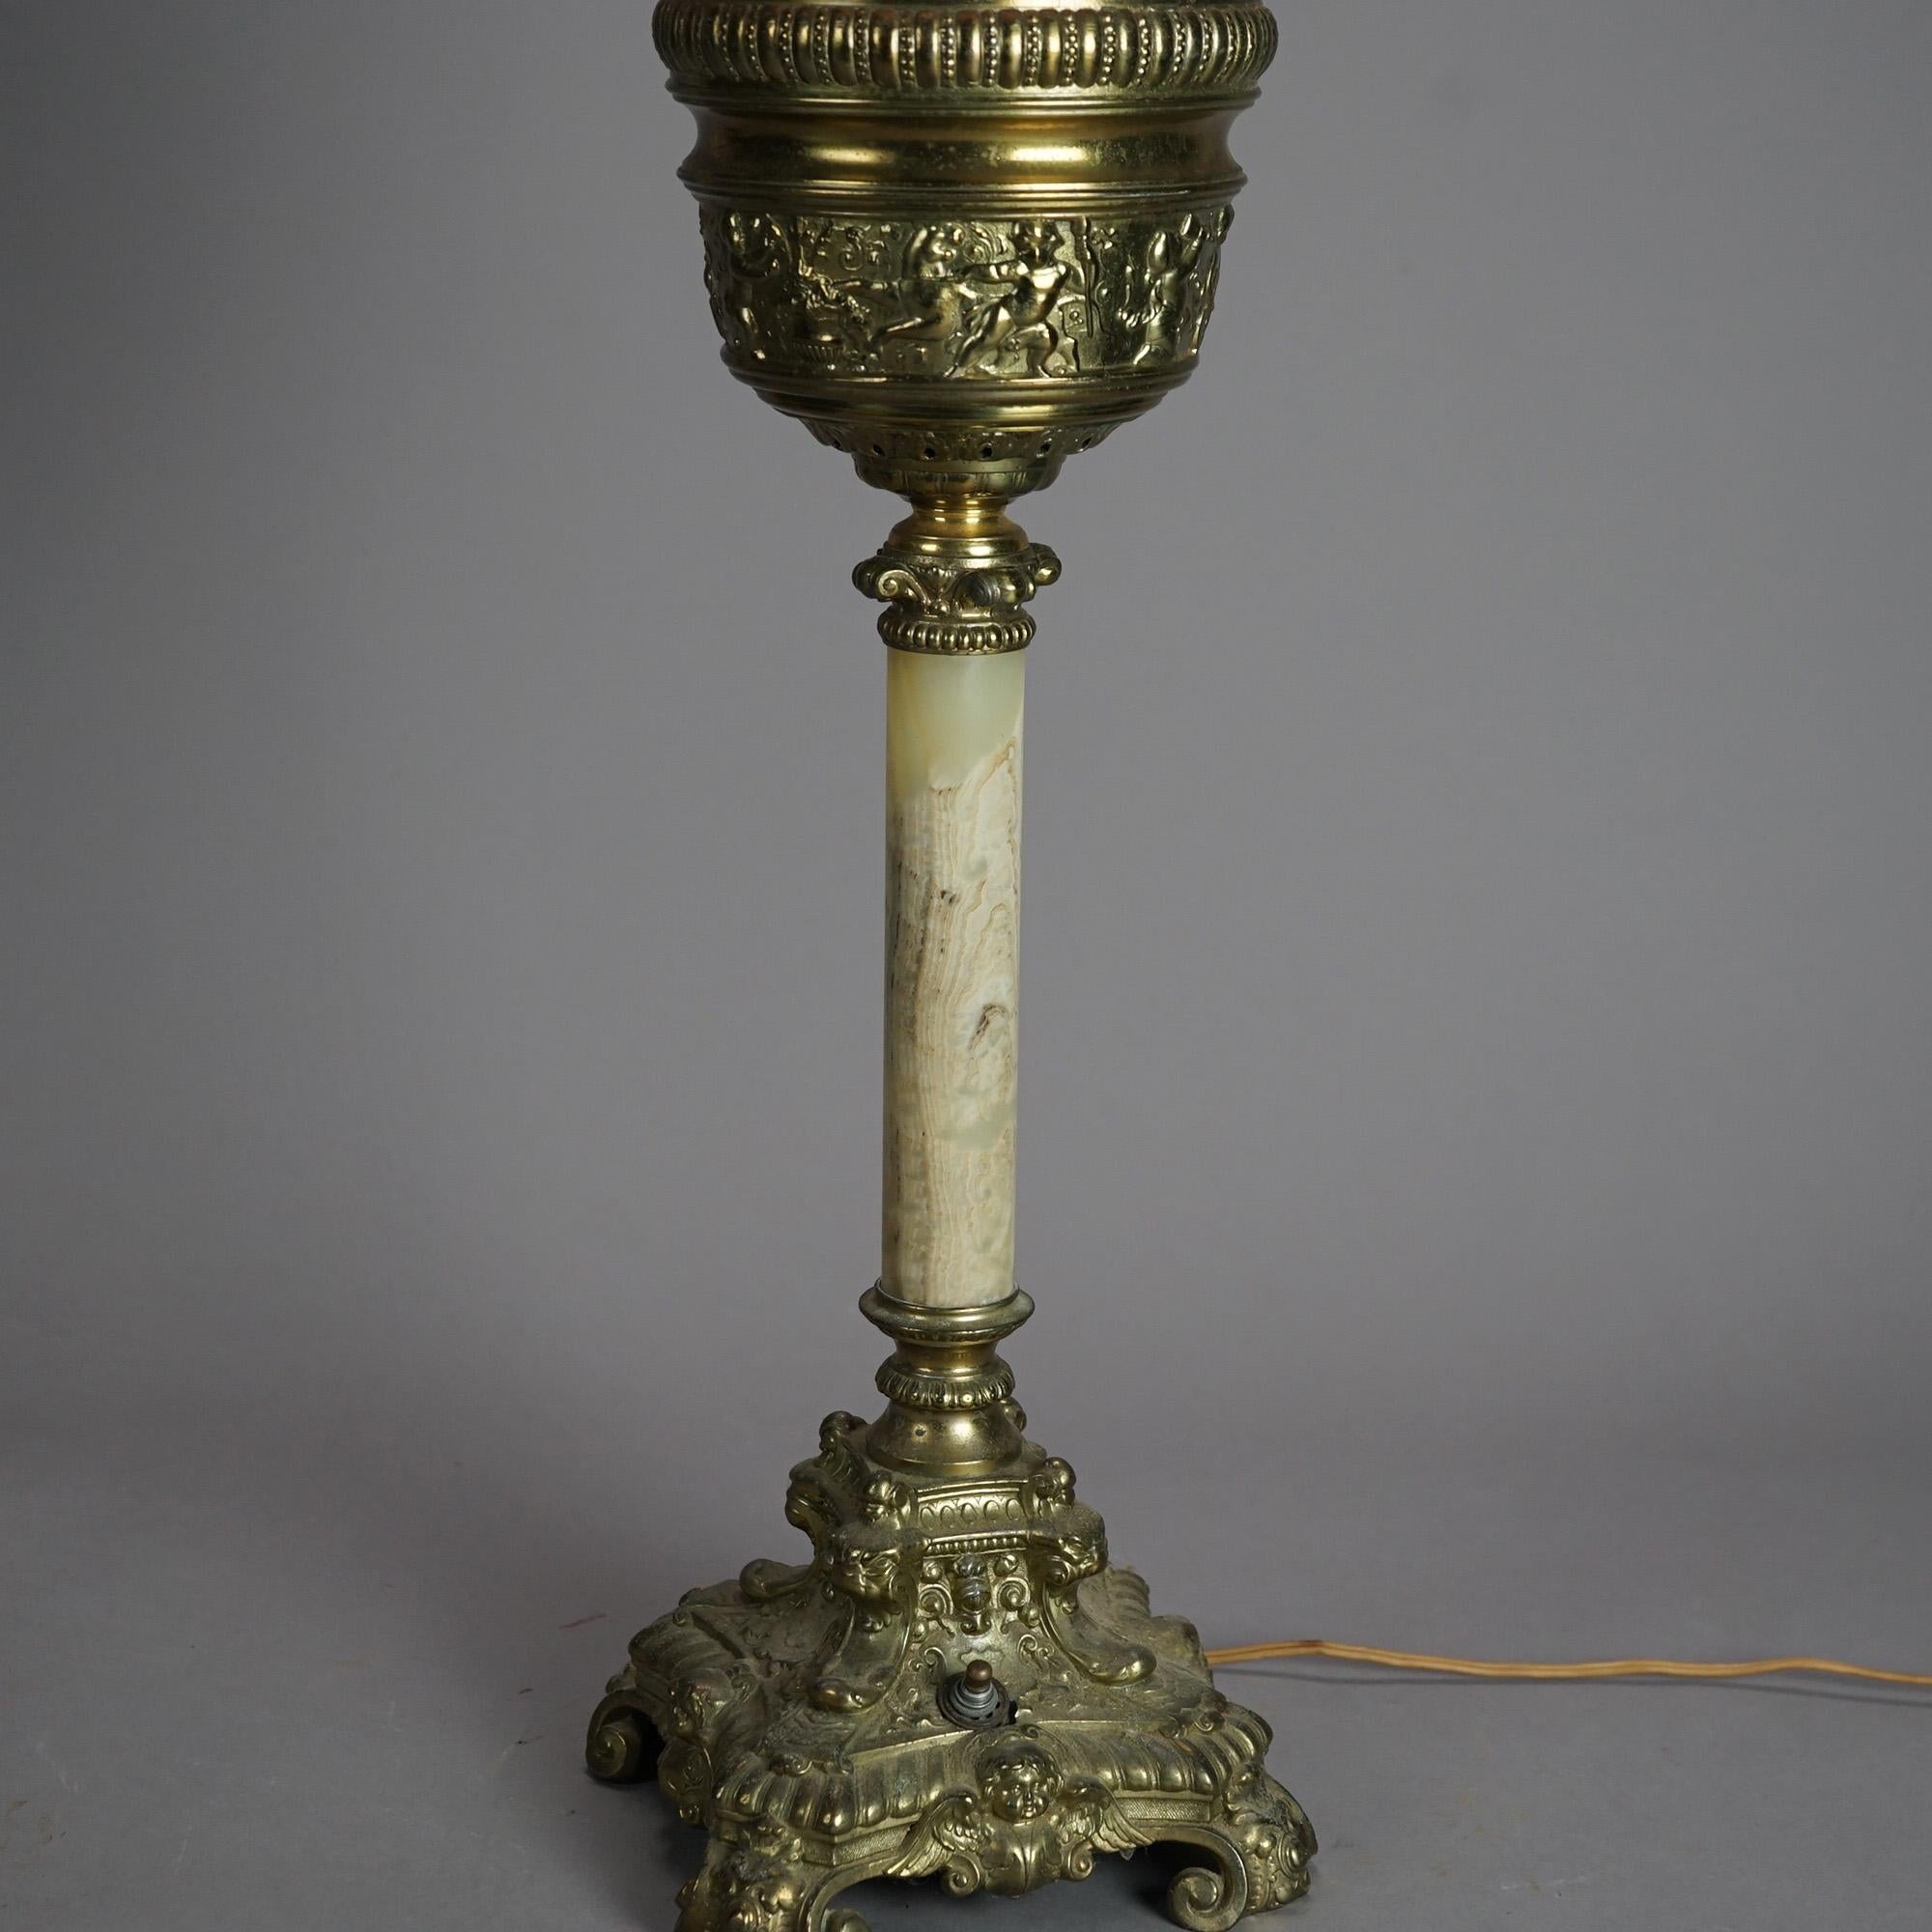 Classical Greek Antique Victorian Gilt Metal & Onyx Gone With The Wind Parlor Lamp c1880